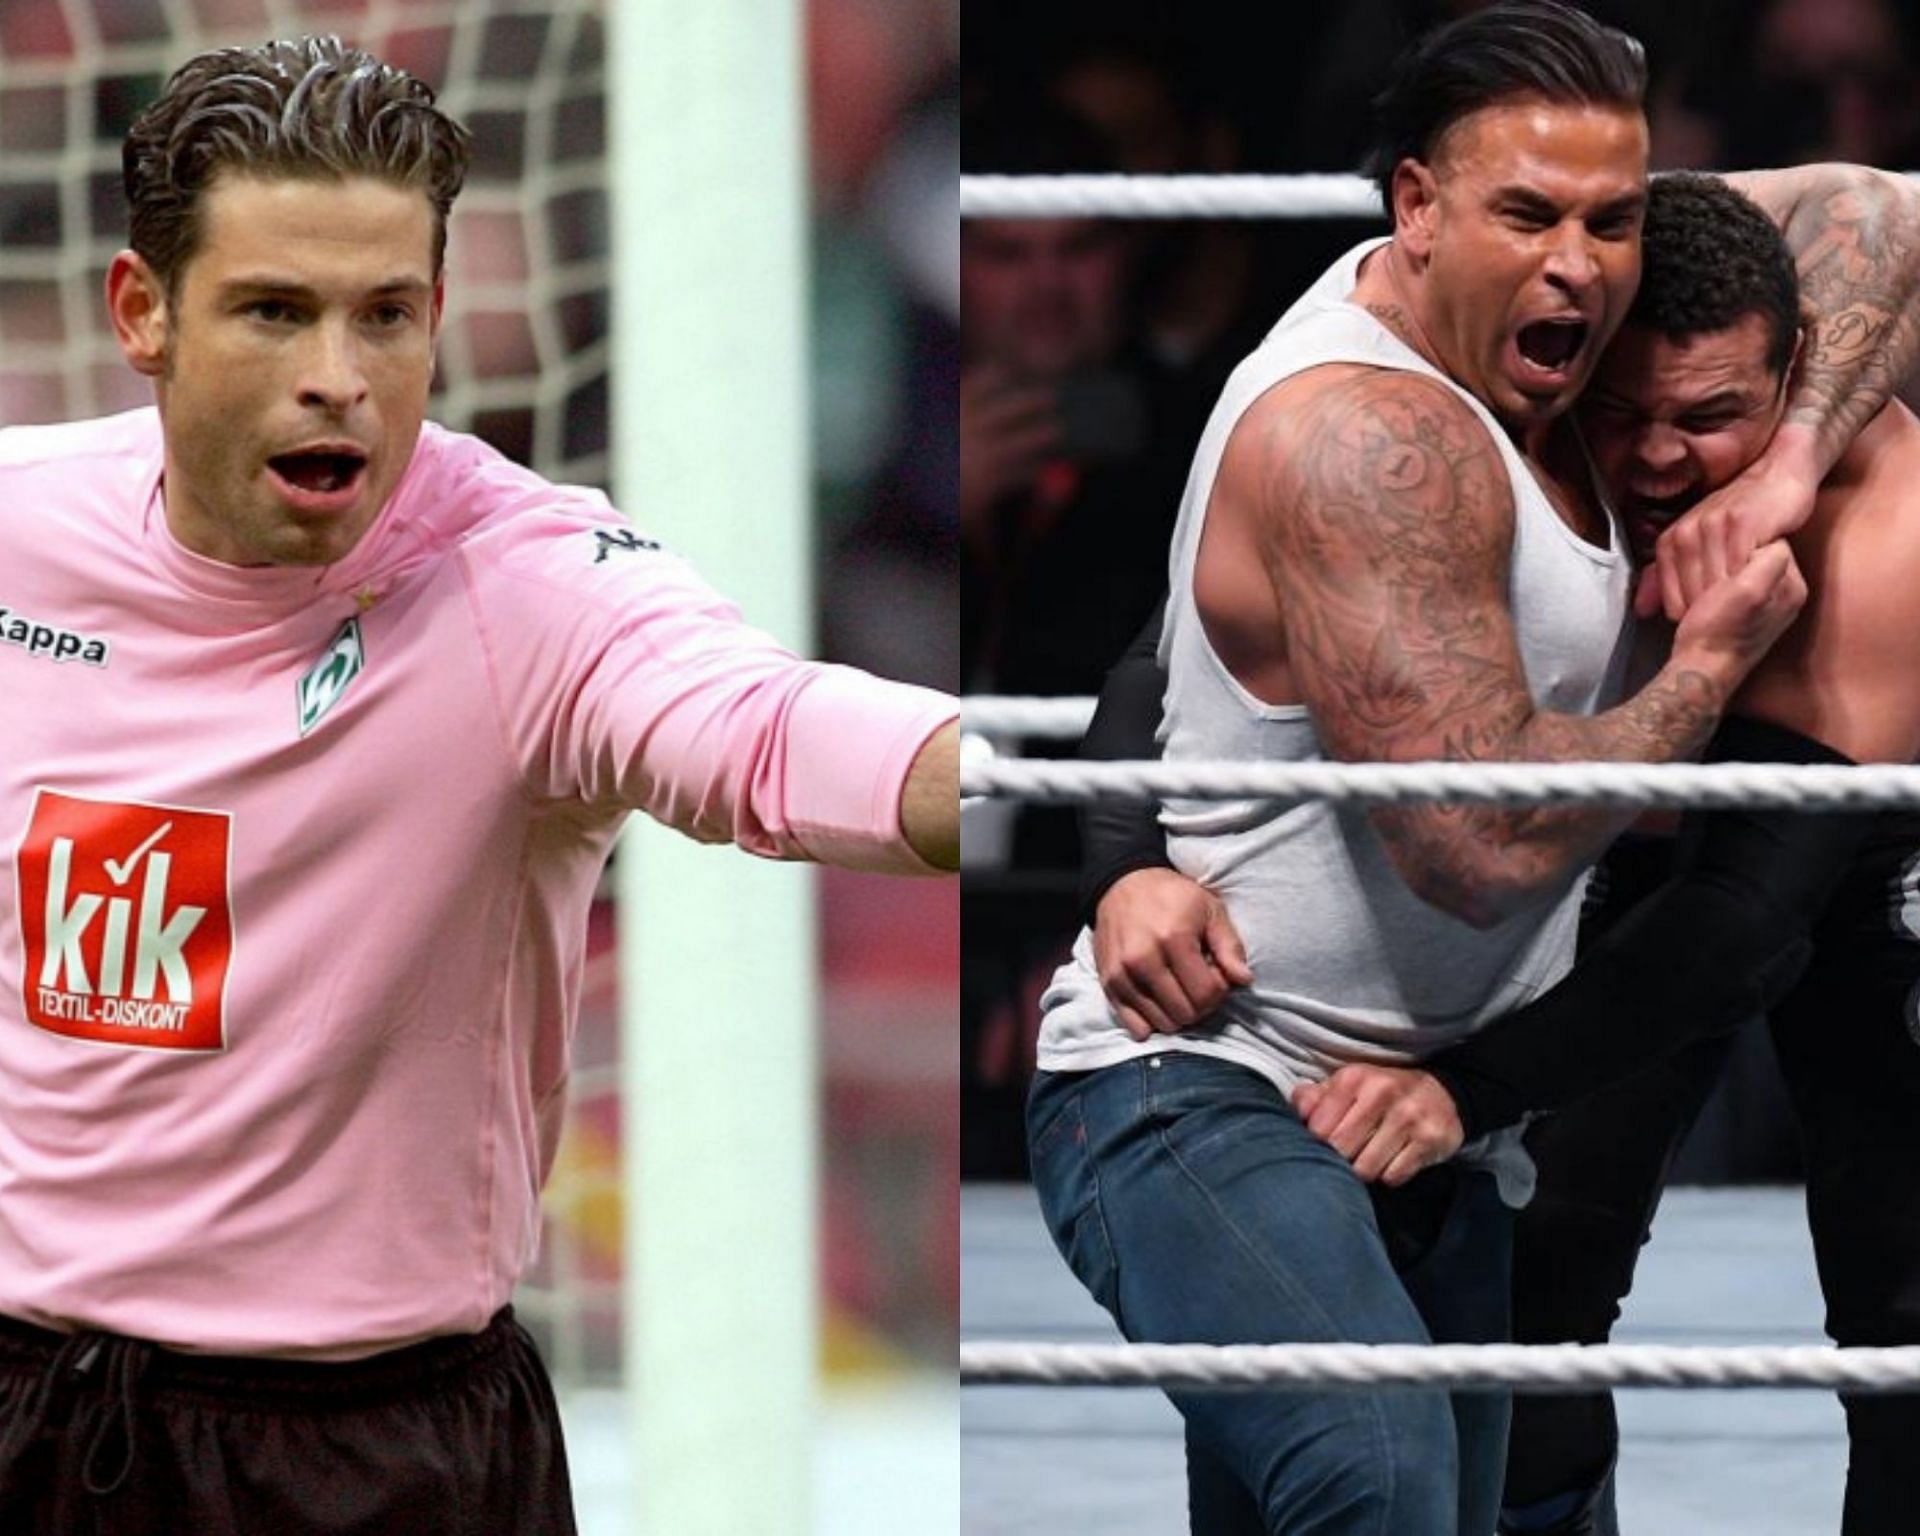 At passe skør kobling 4 Soccer players who didn't excel in WWE